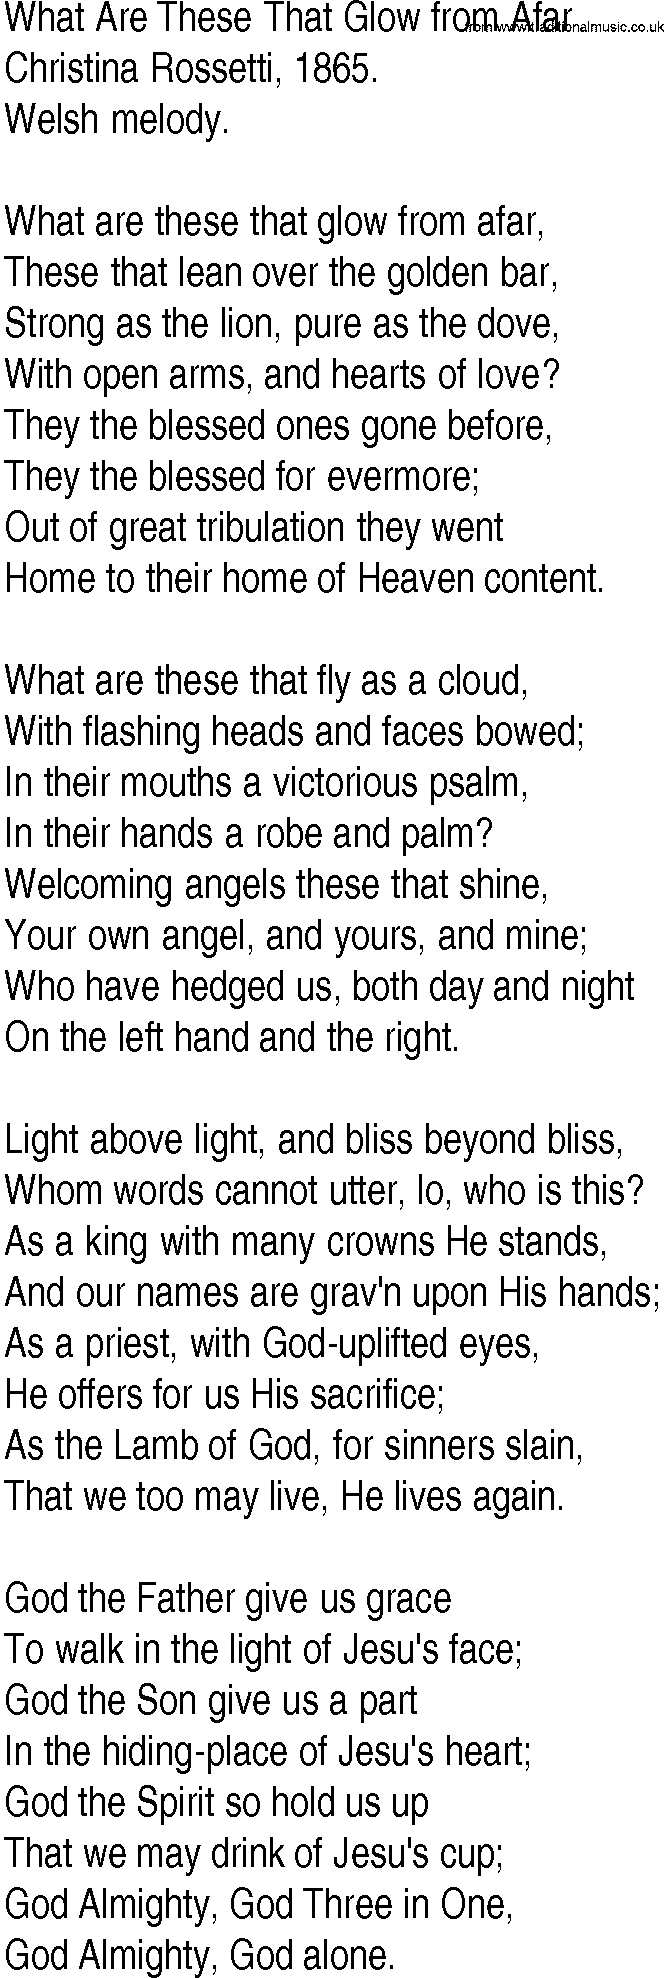 Hymn and Gospel Song: What Are These That Glow from Afar by Christina Rossetti lyrics